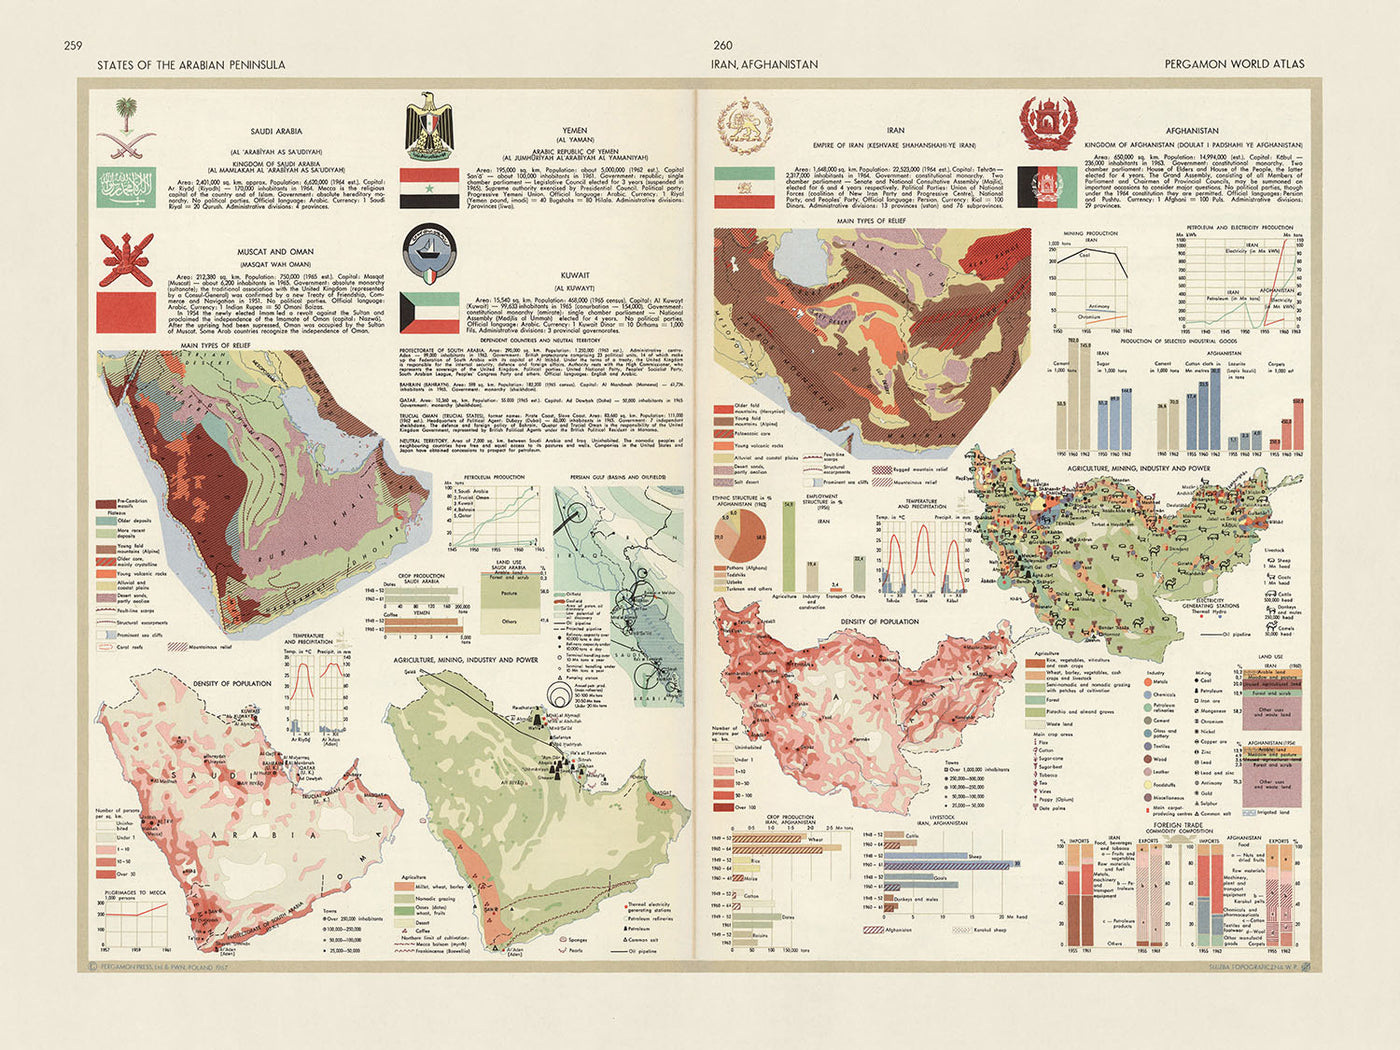 Old Infographic Map of the Arabian Peninsula: Agriculture, Land Use, and Population, 1967